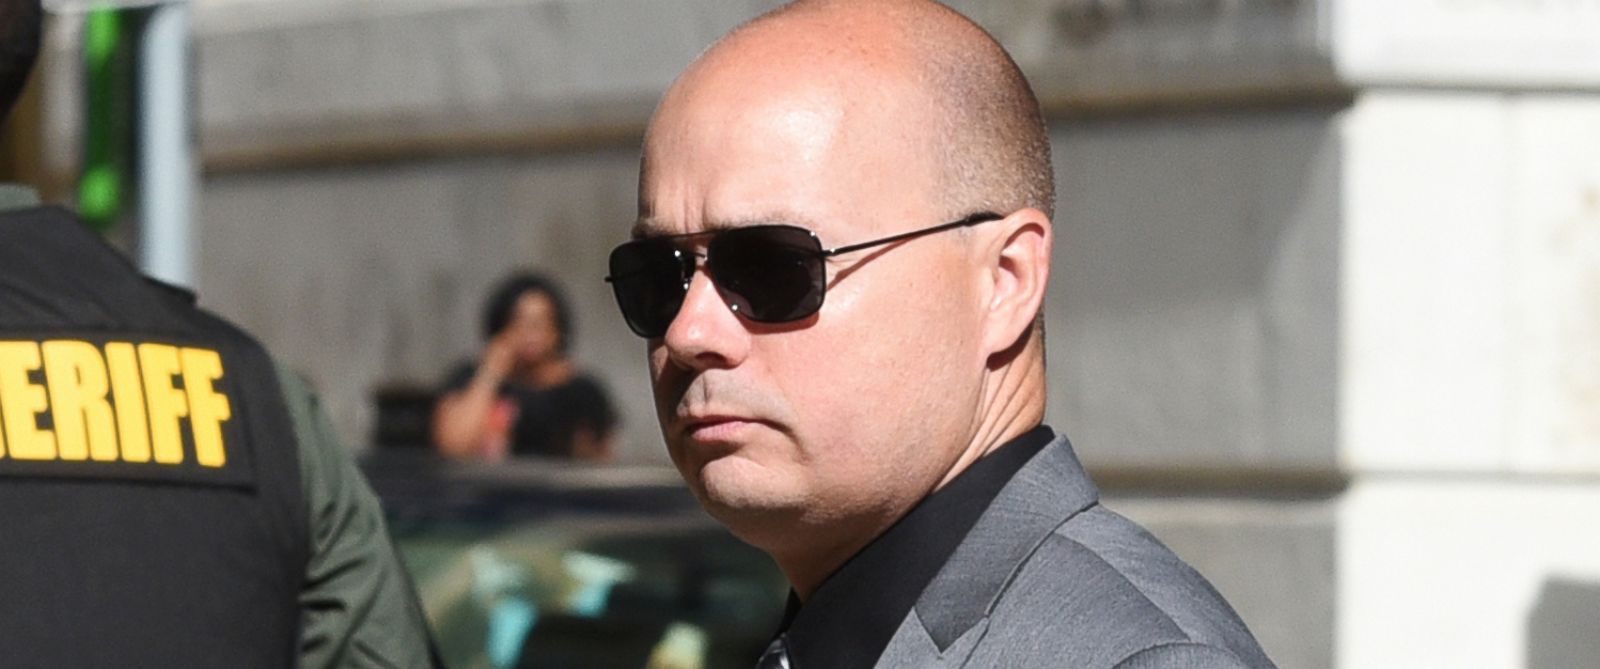 Brian Rice The Highest Ranking Officer Has Been Acquitted In The Freddie Gray Case